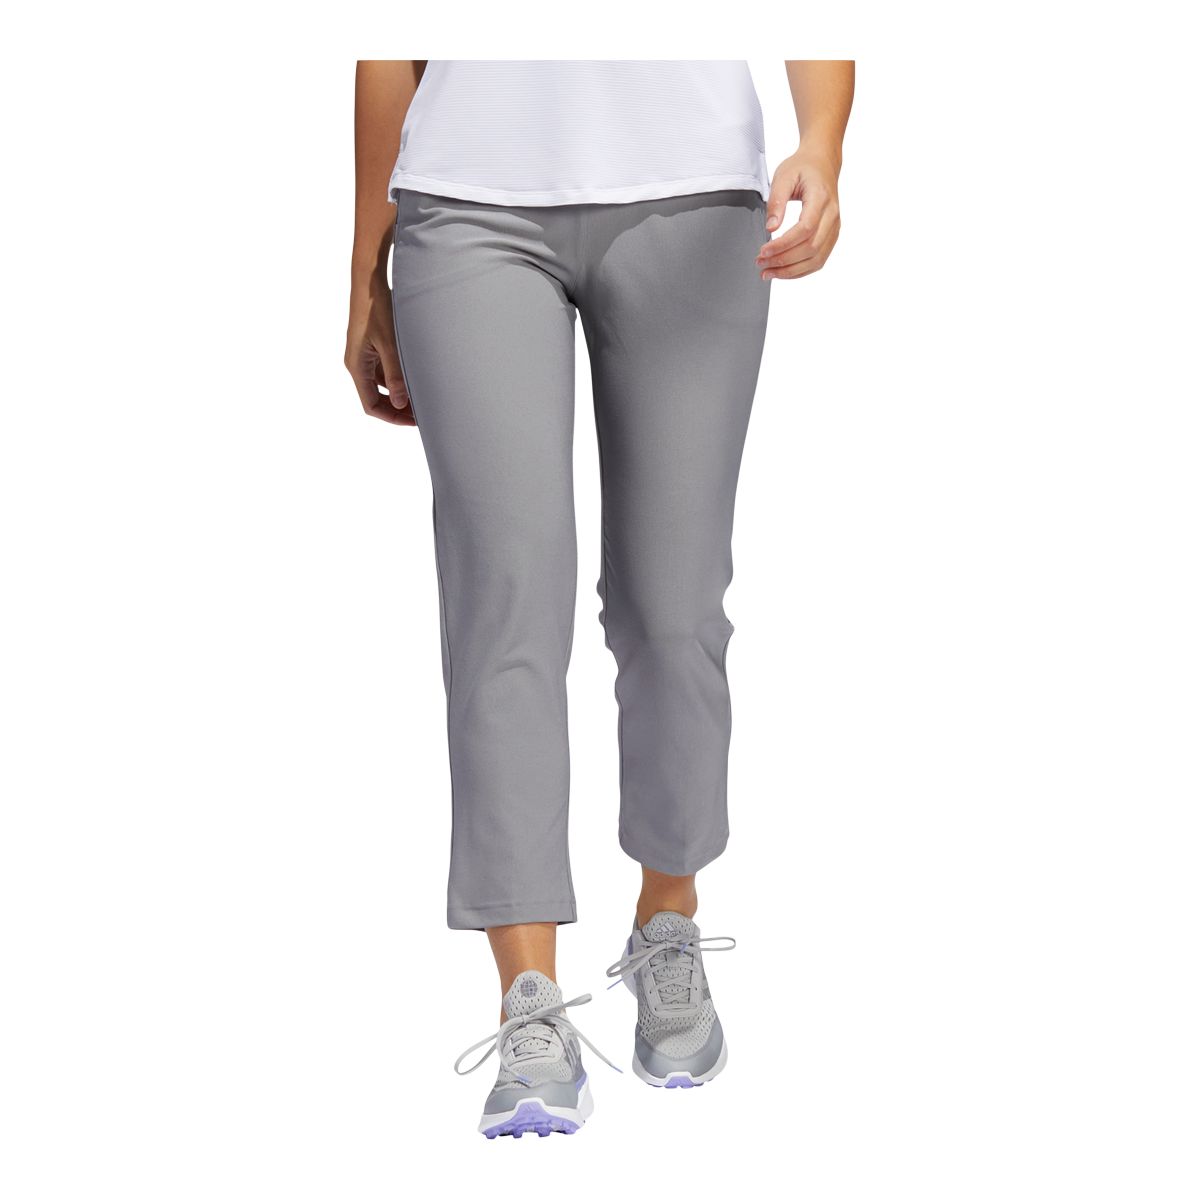 Image of adidas Golf Women's Pull On Ankle Pants